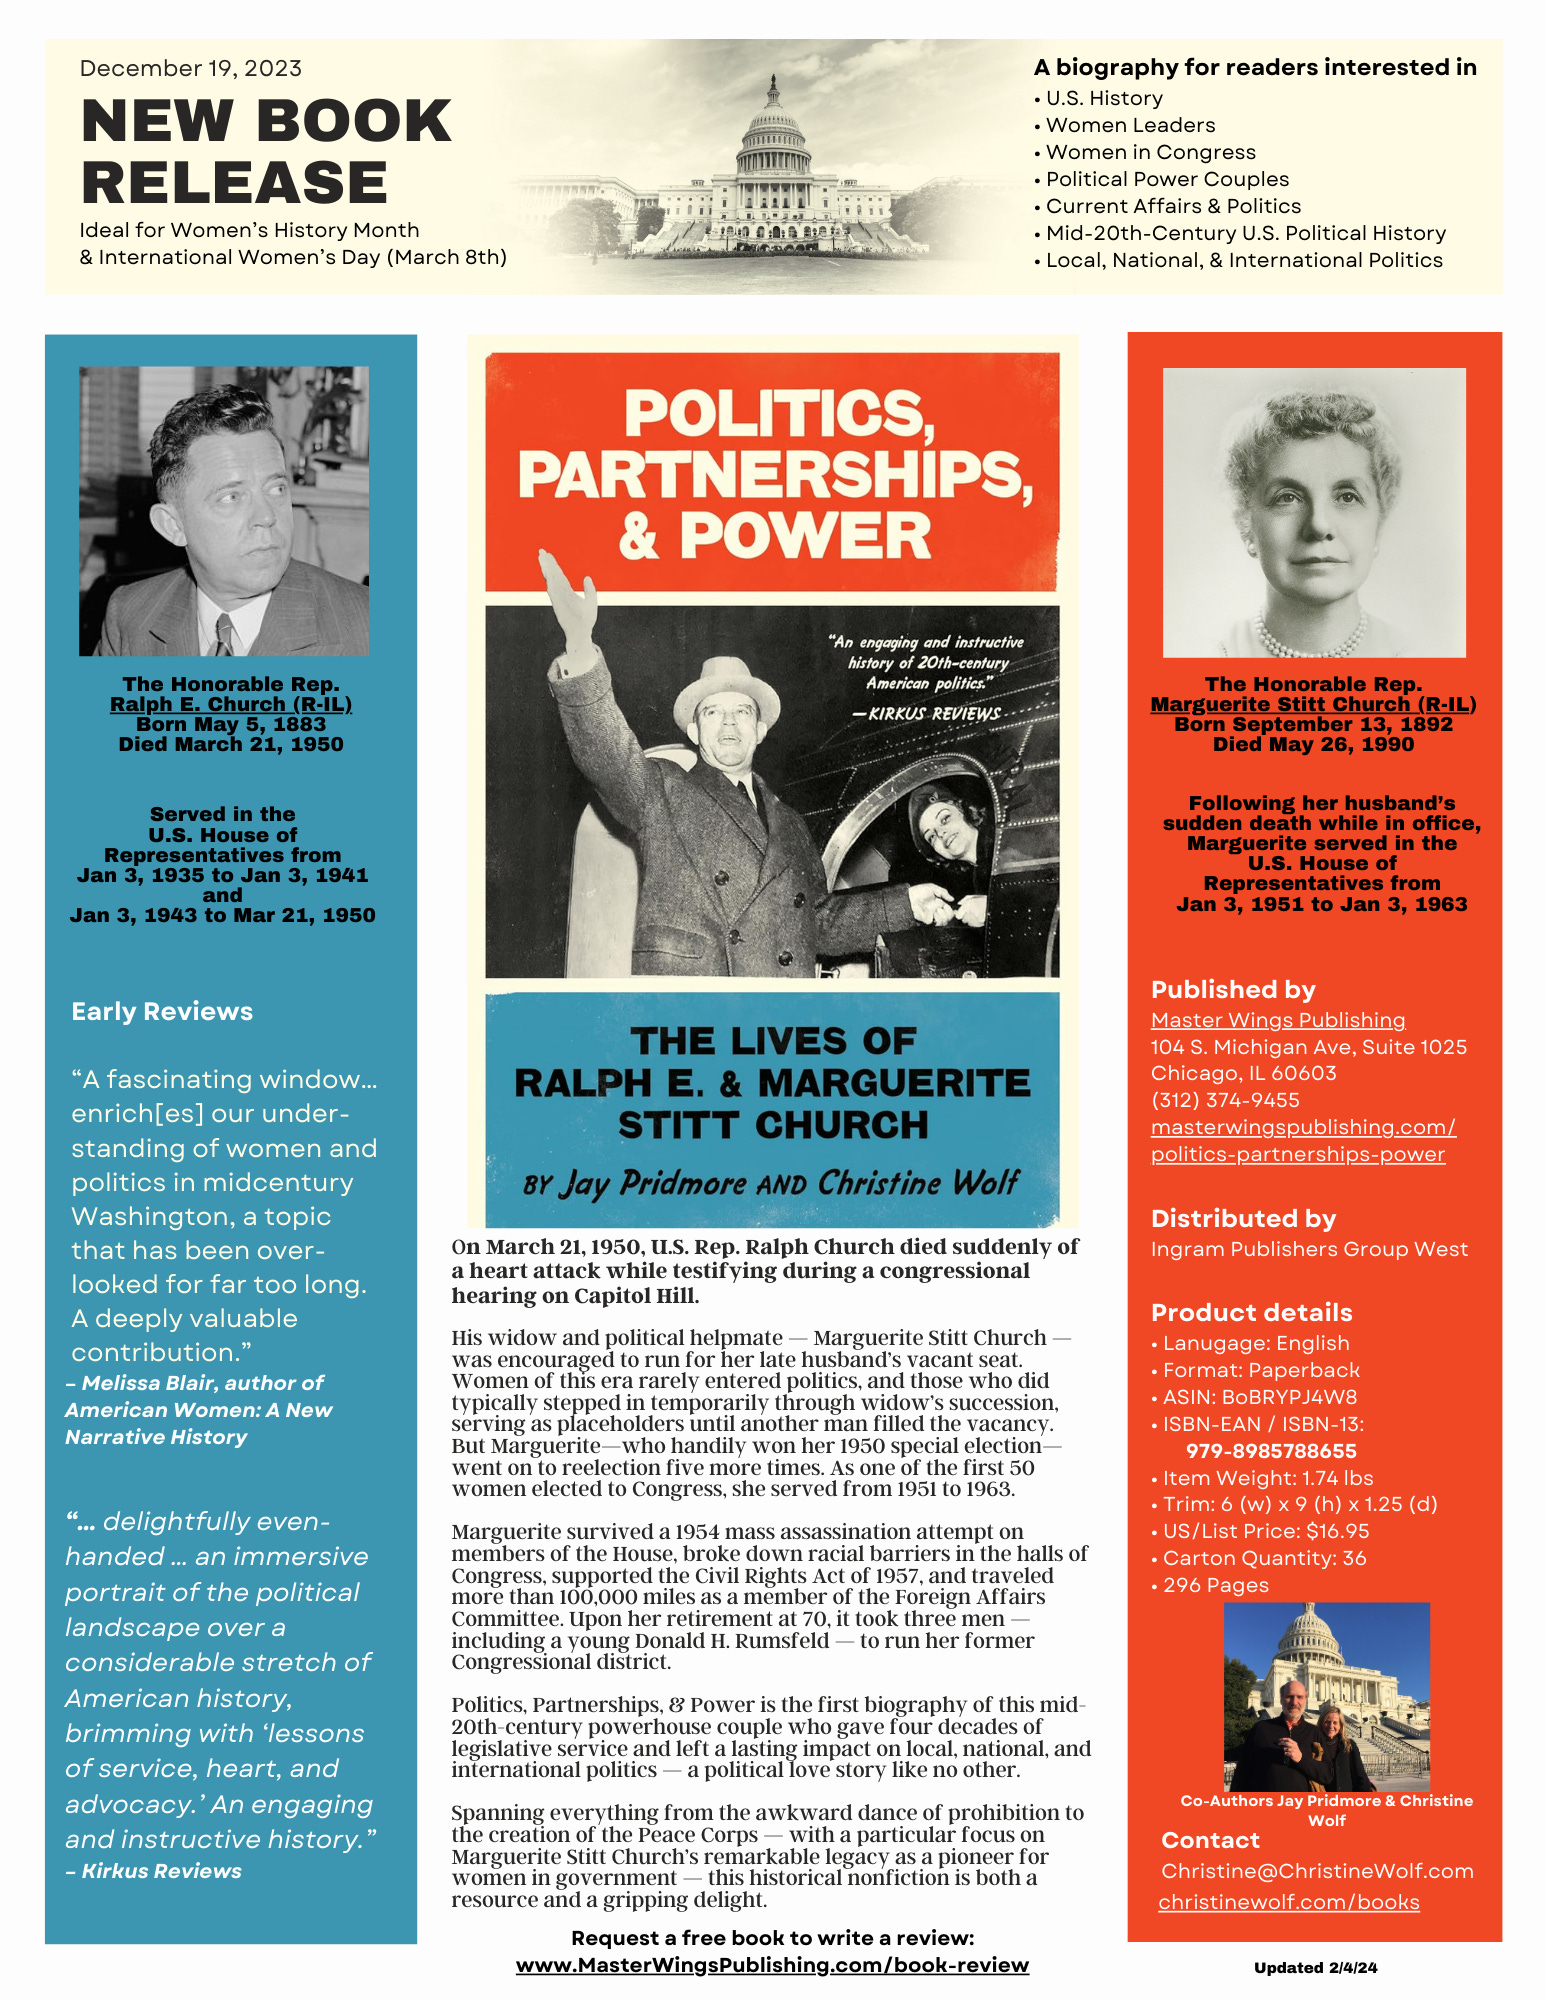 Press release for Politics, Partnerships, & Power: The Lives of Ralph E. and Marguerite Stitt Church by Jay Pridmore and Christine Wolf